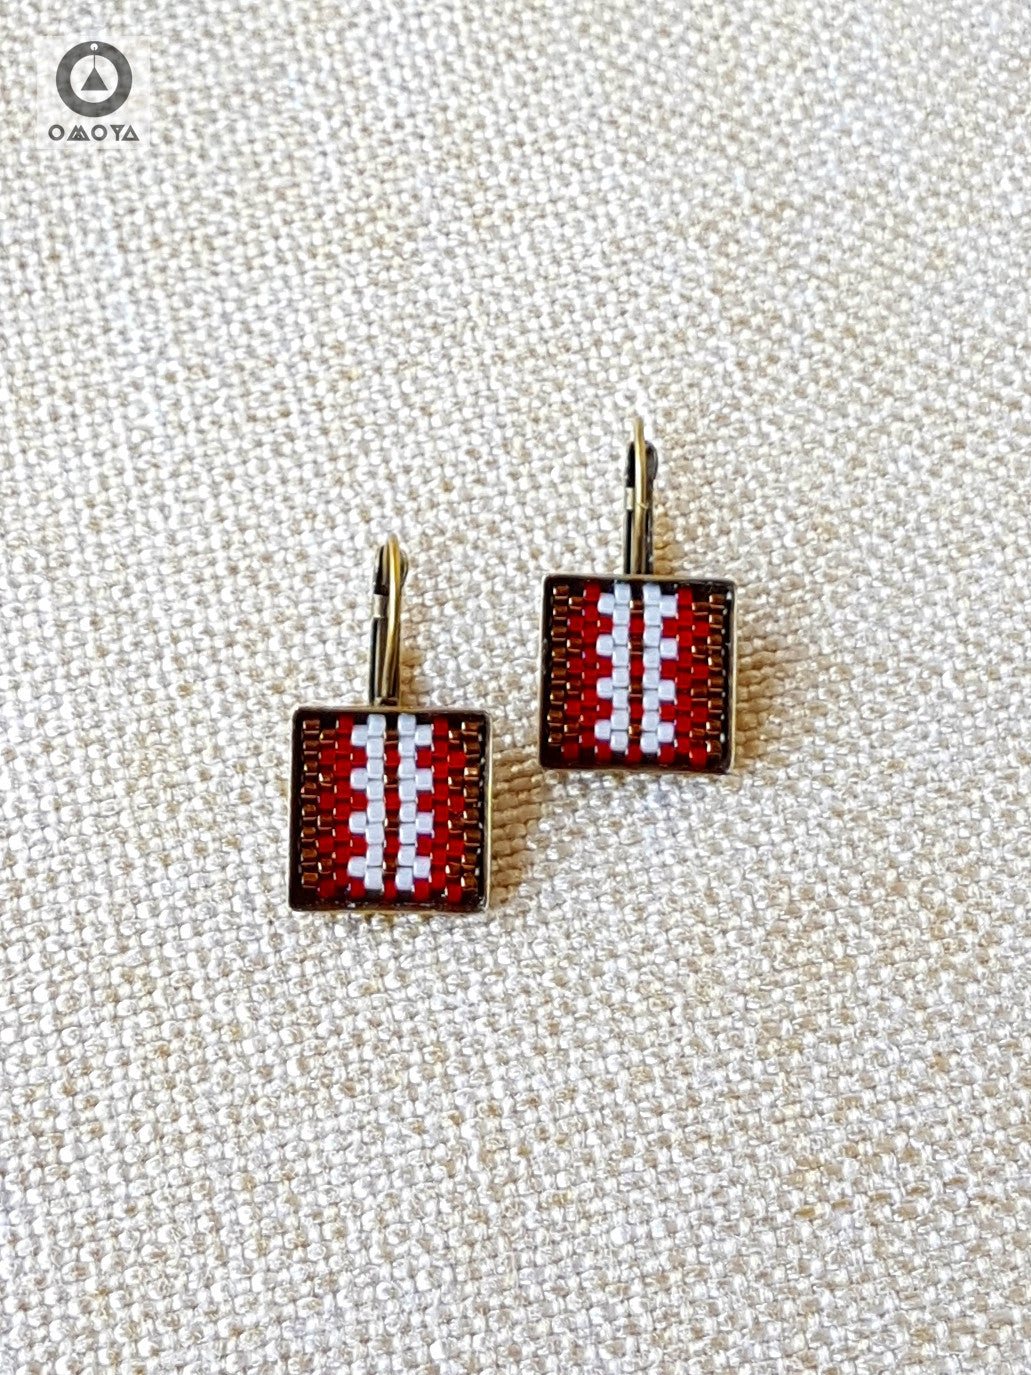 Stripe Earrings in Deep Red, Bronze and Cream